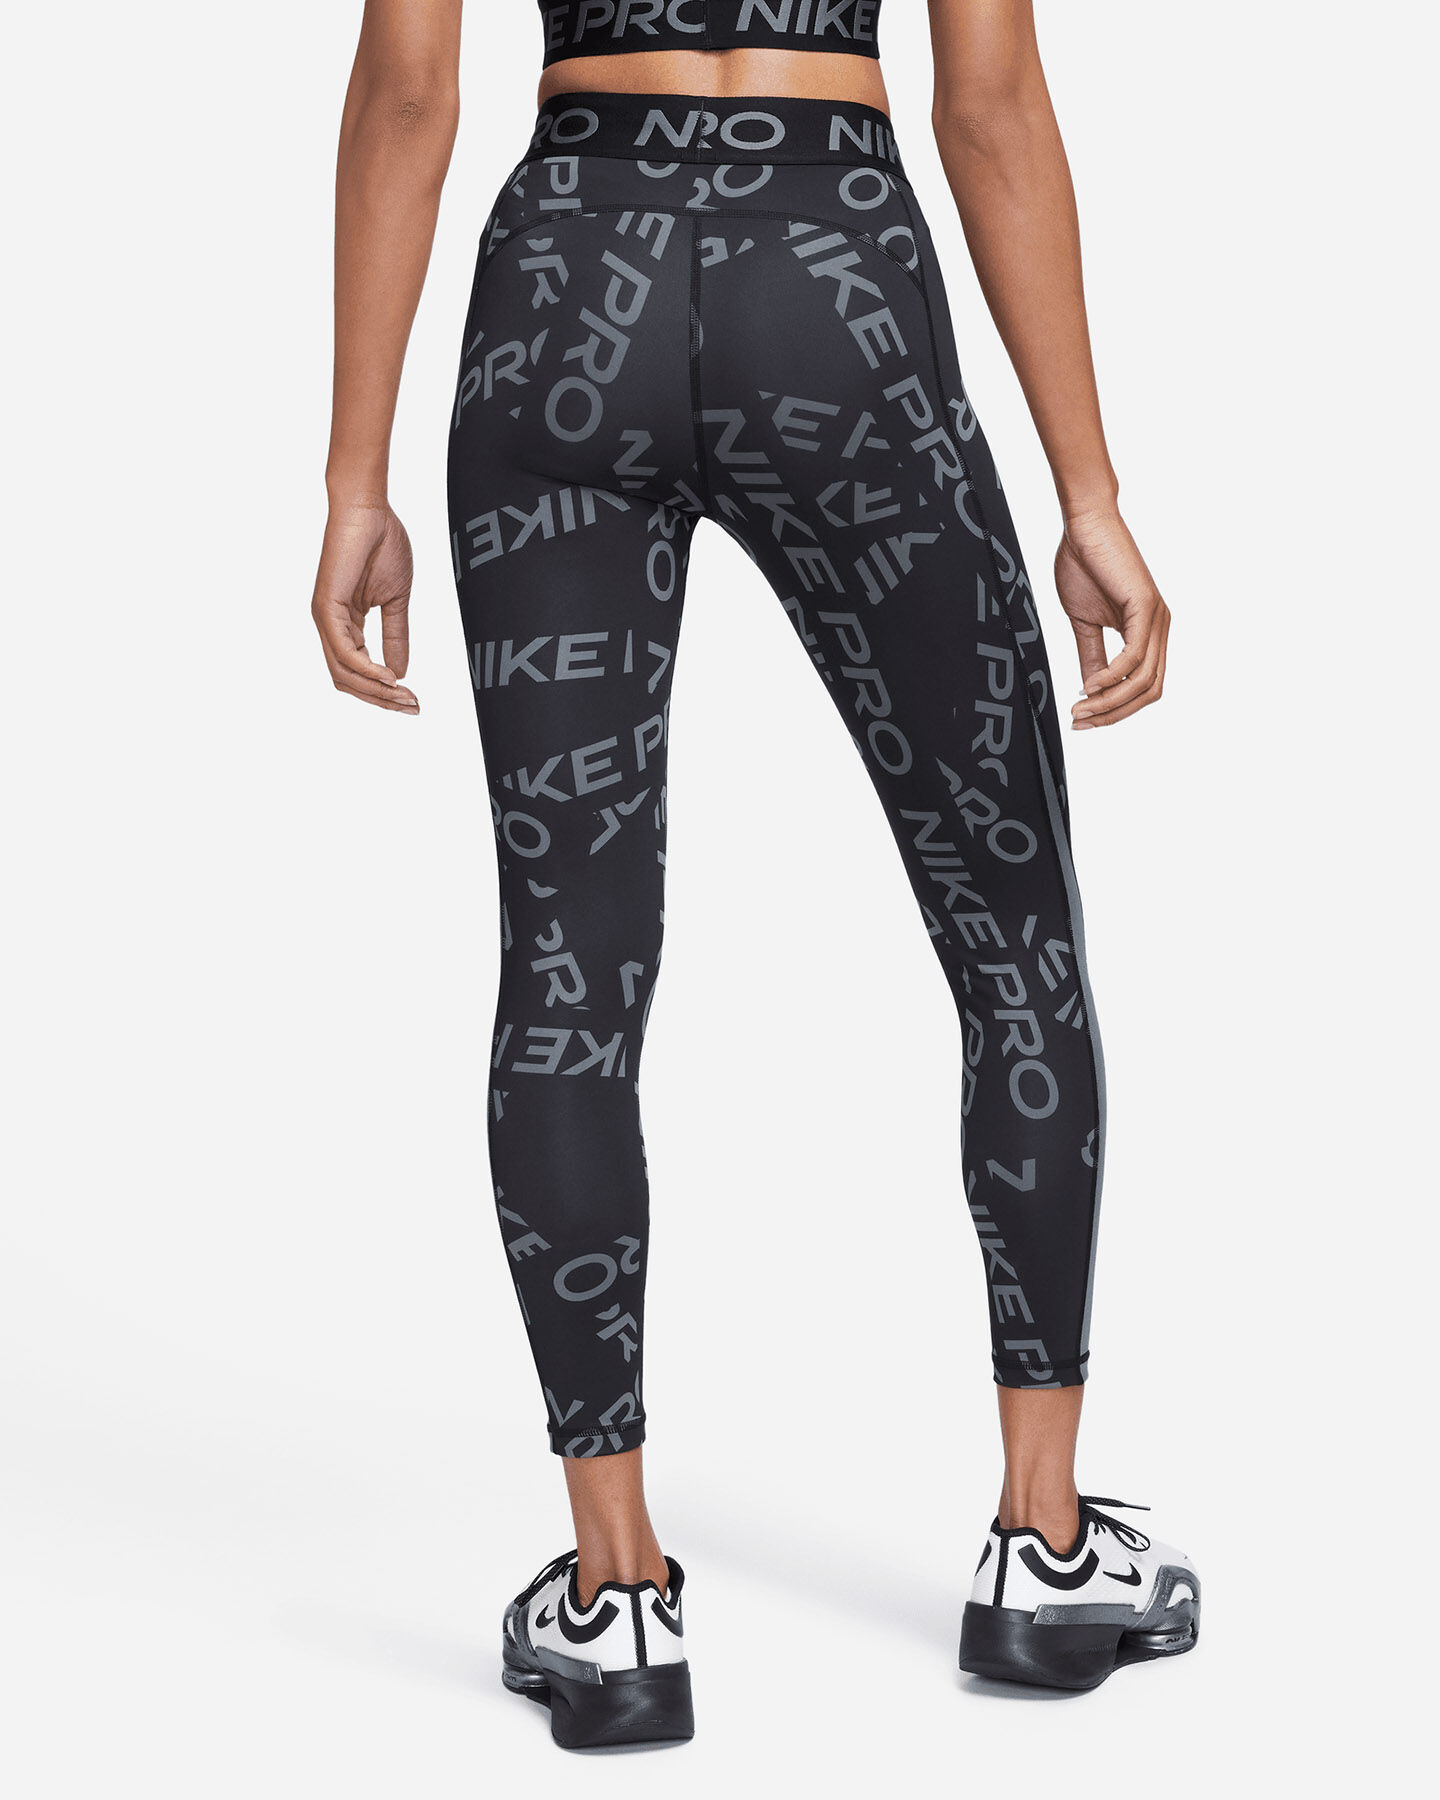  Leggings NIKE ALL OVER PRINTED W S5587903|010|L scatto 1